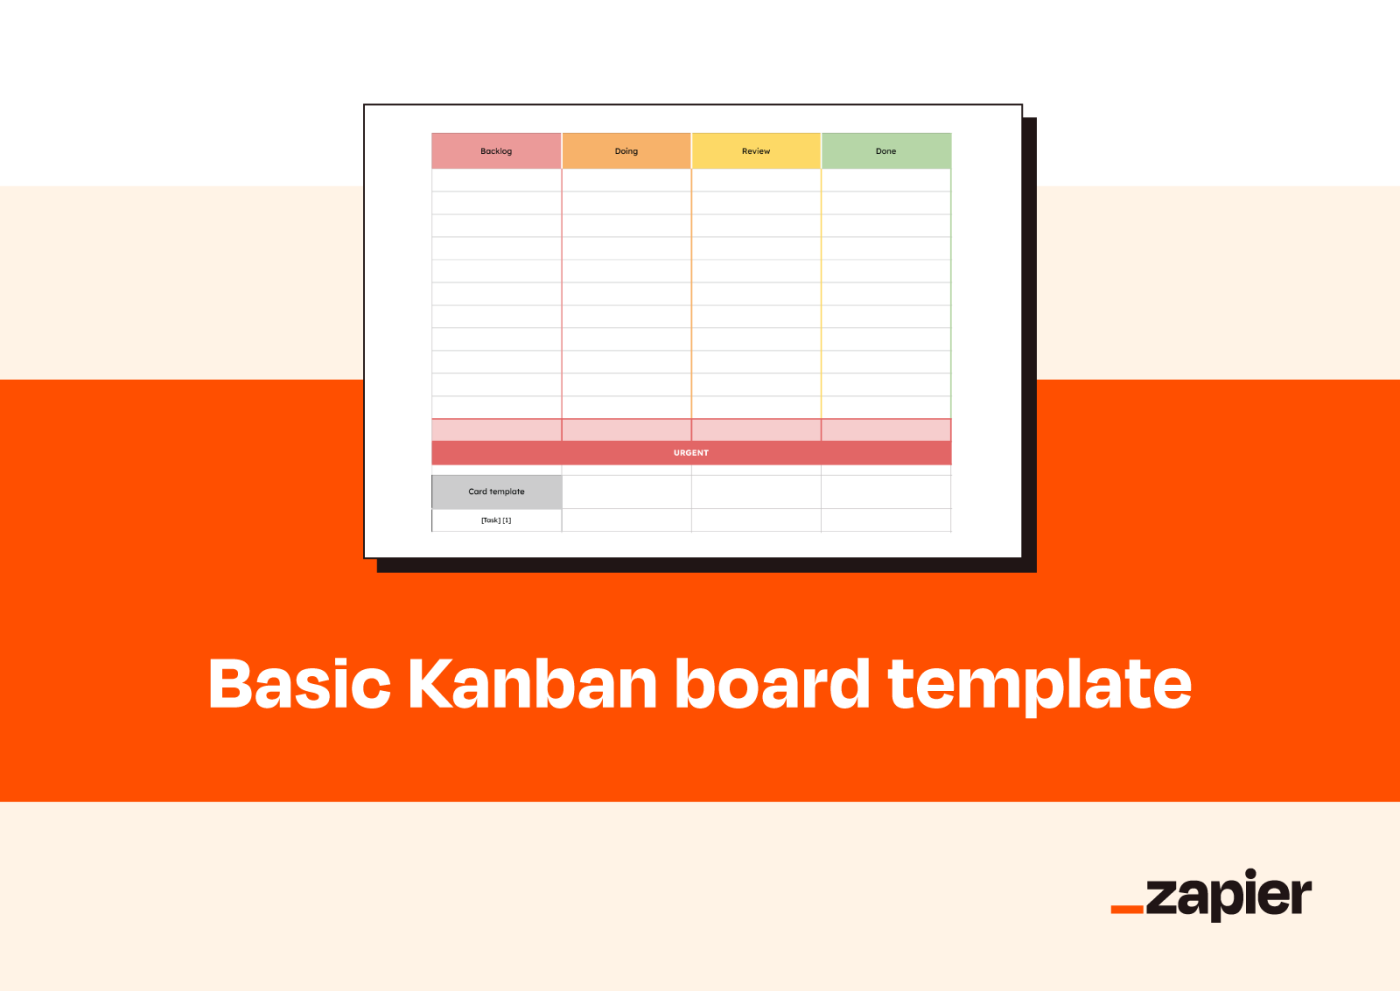 Graphic reading Basic Kanban board template with screenshot of the template.